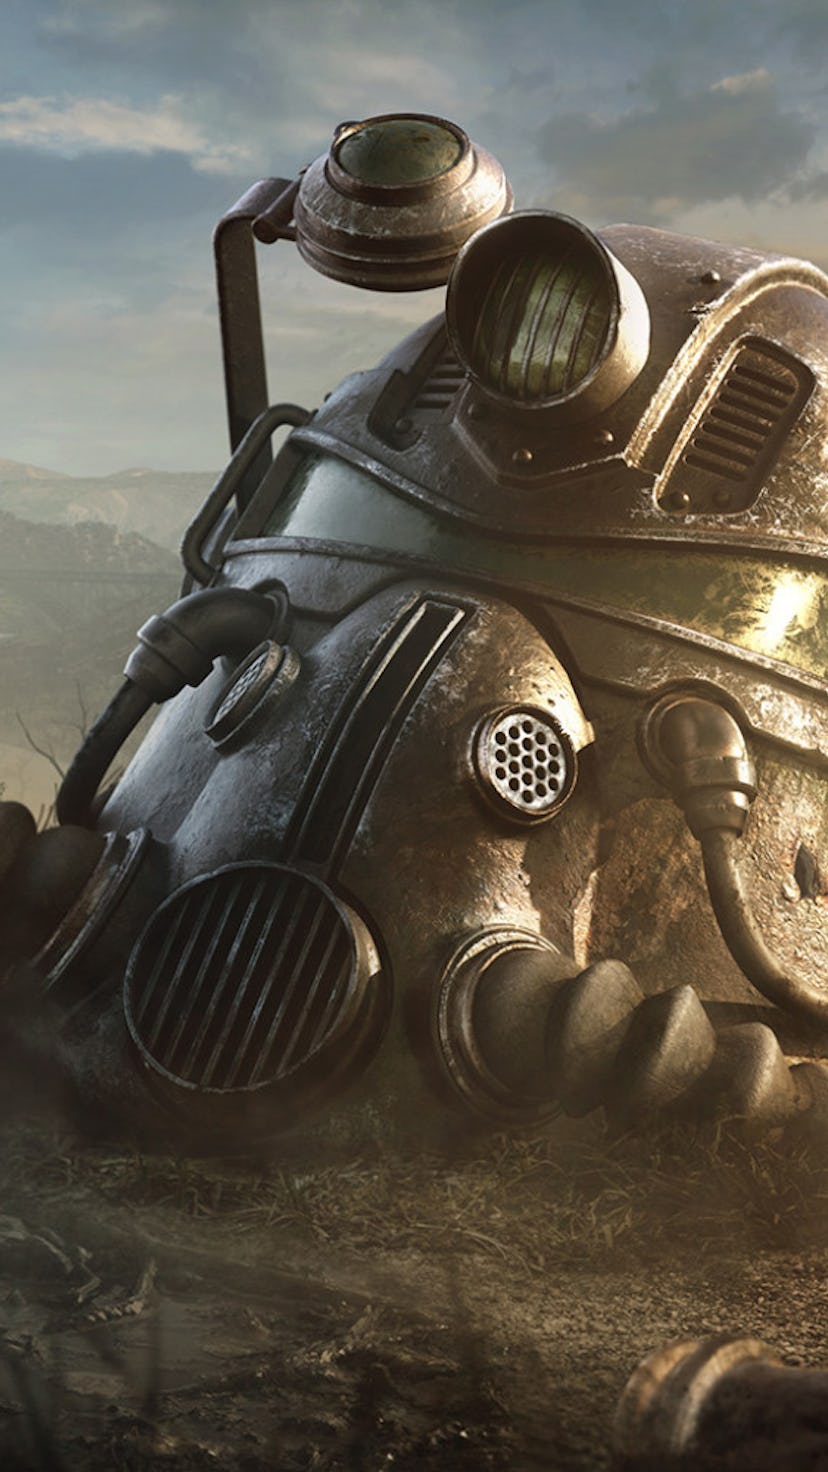 Promotional art for Fallout which is owned by Bethesda.